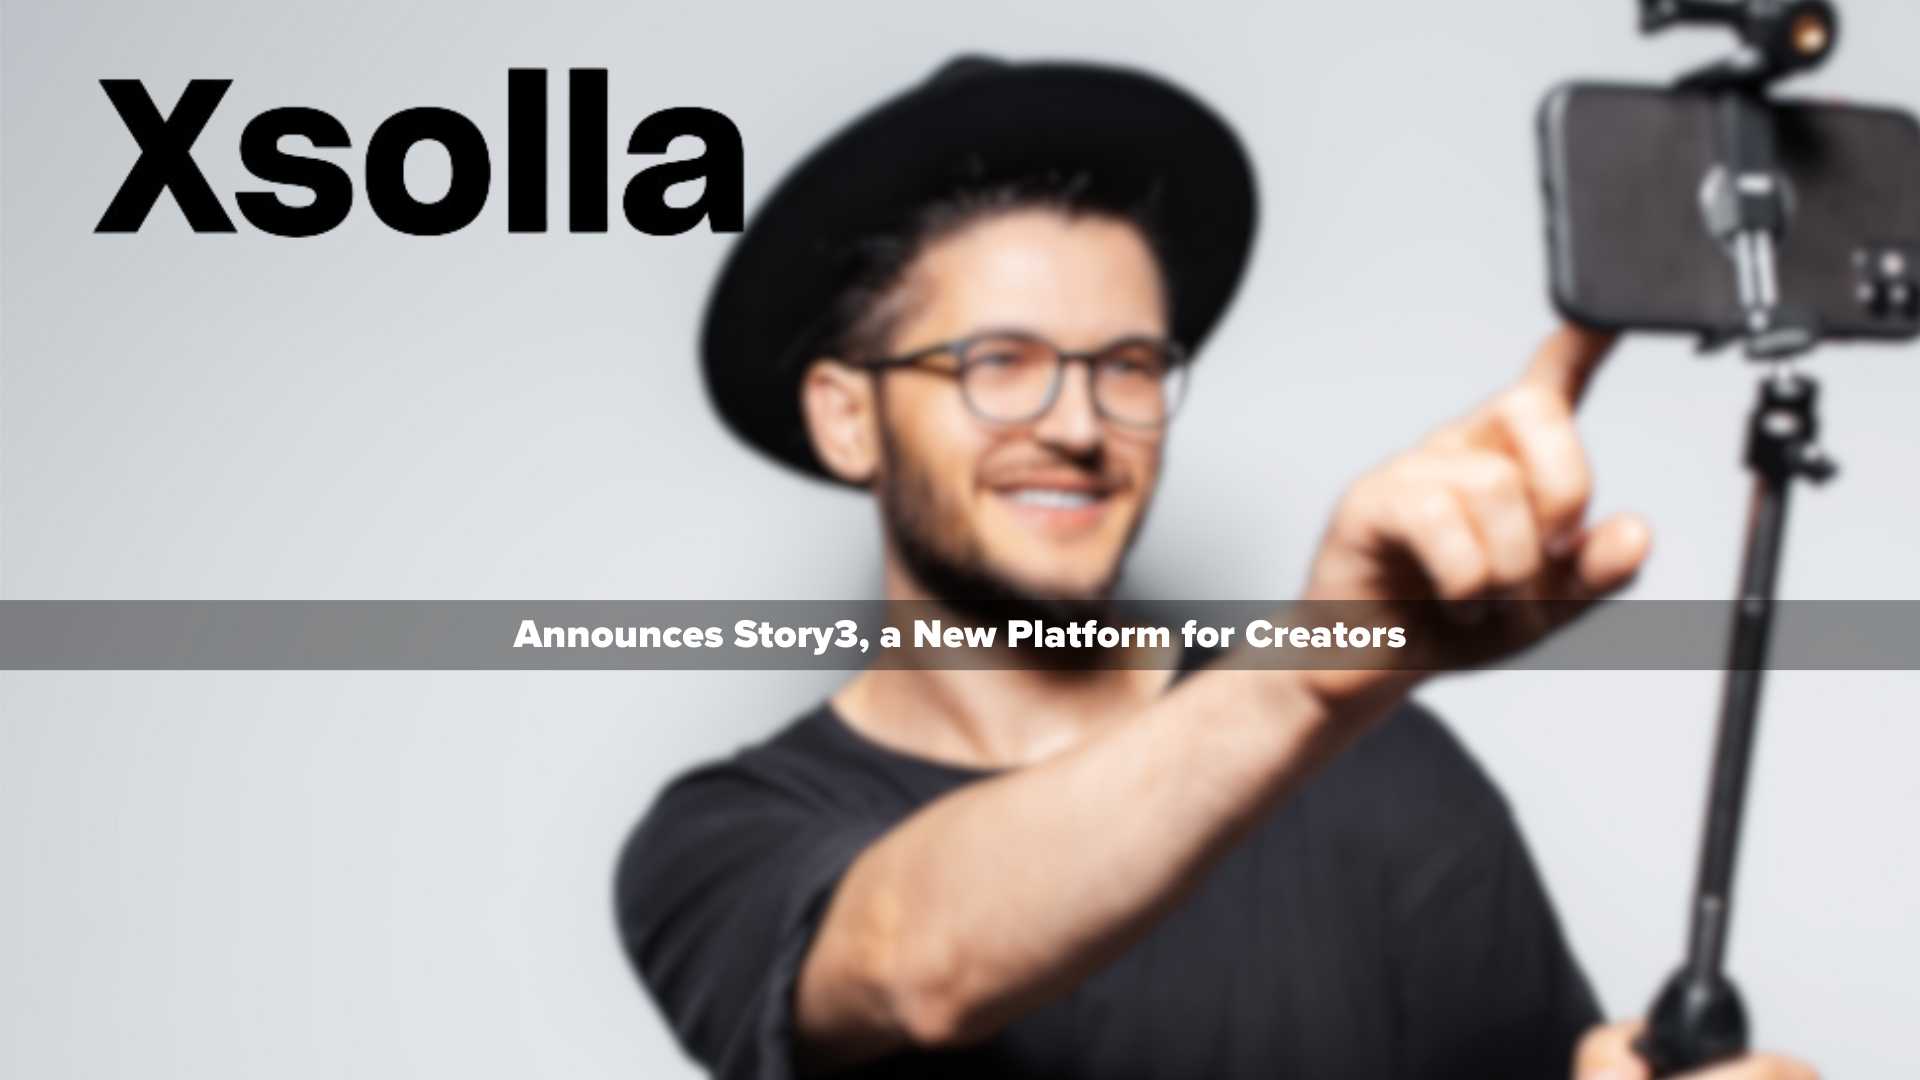 Xsolla Announces Story3, a New Platform for Creators: Fair Compensation, Direct-to-Consumer Transactions, and Enhanced Creativity